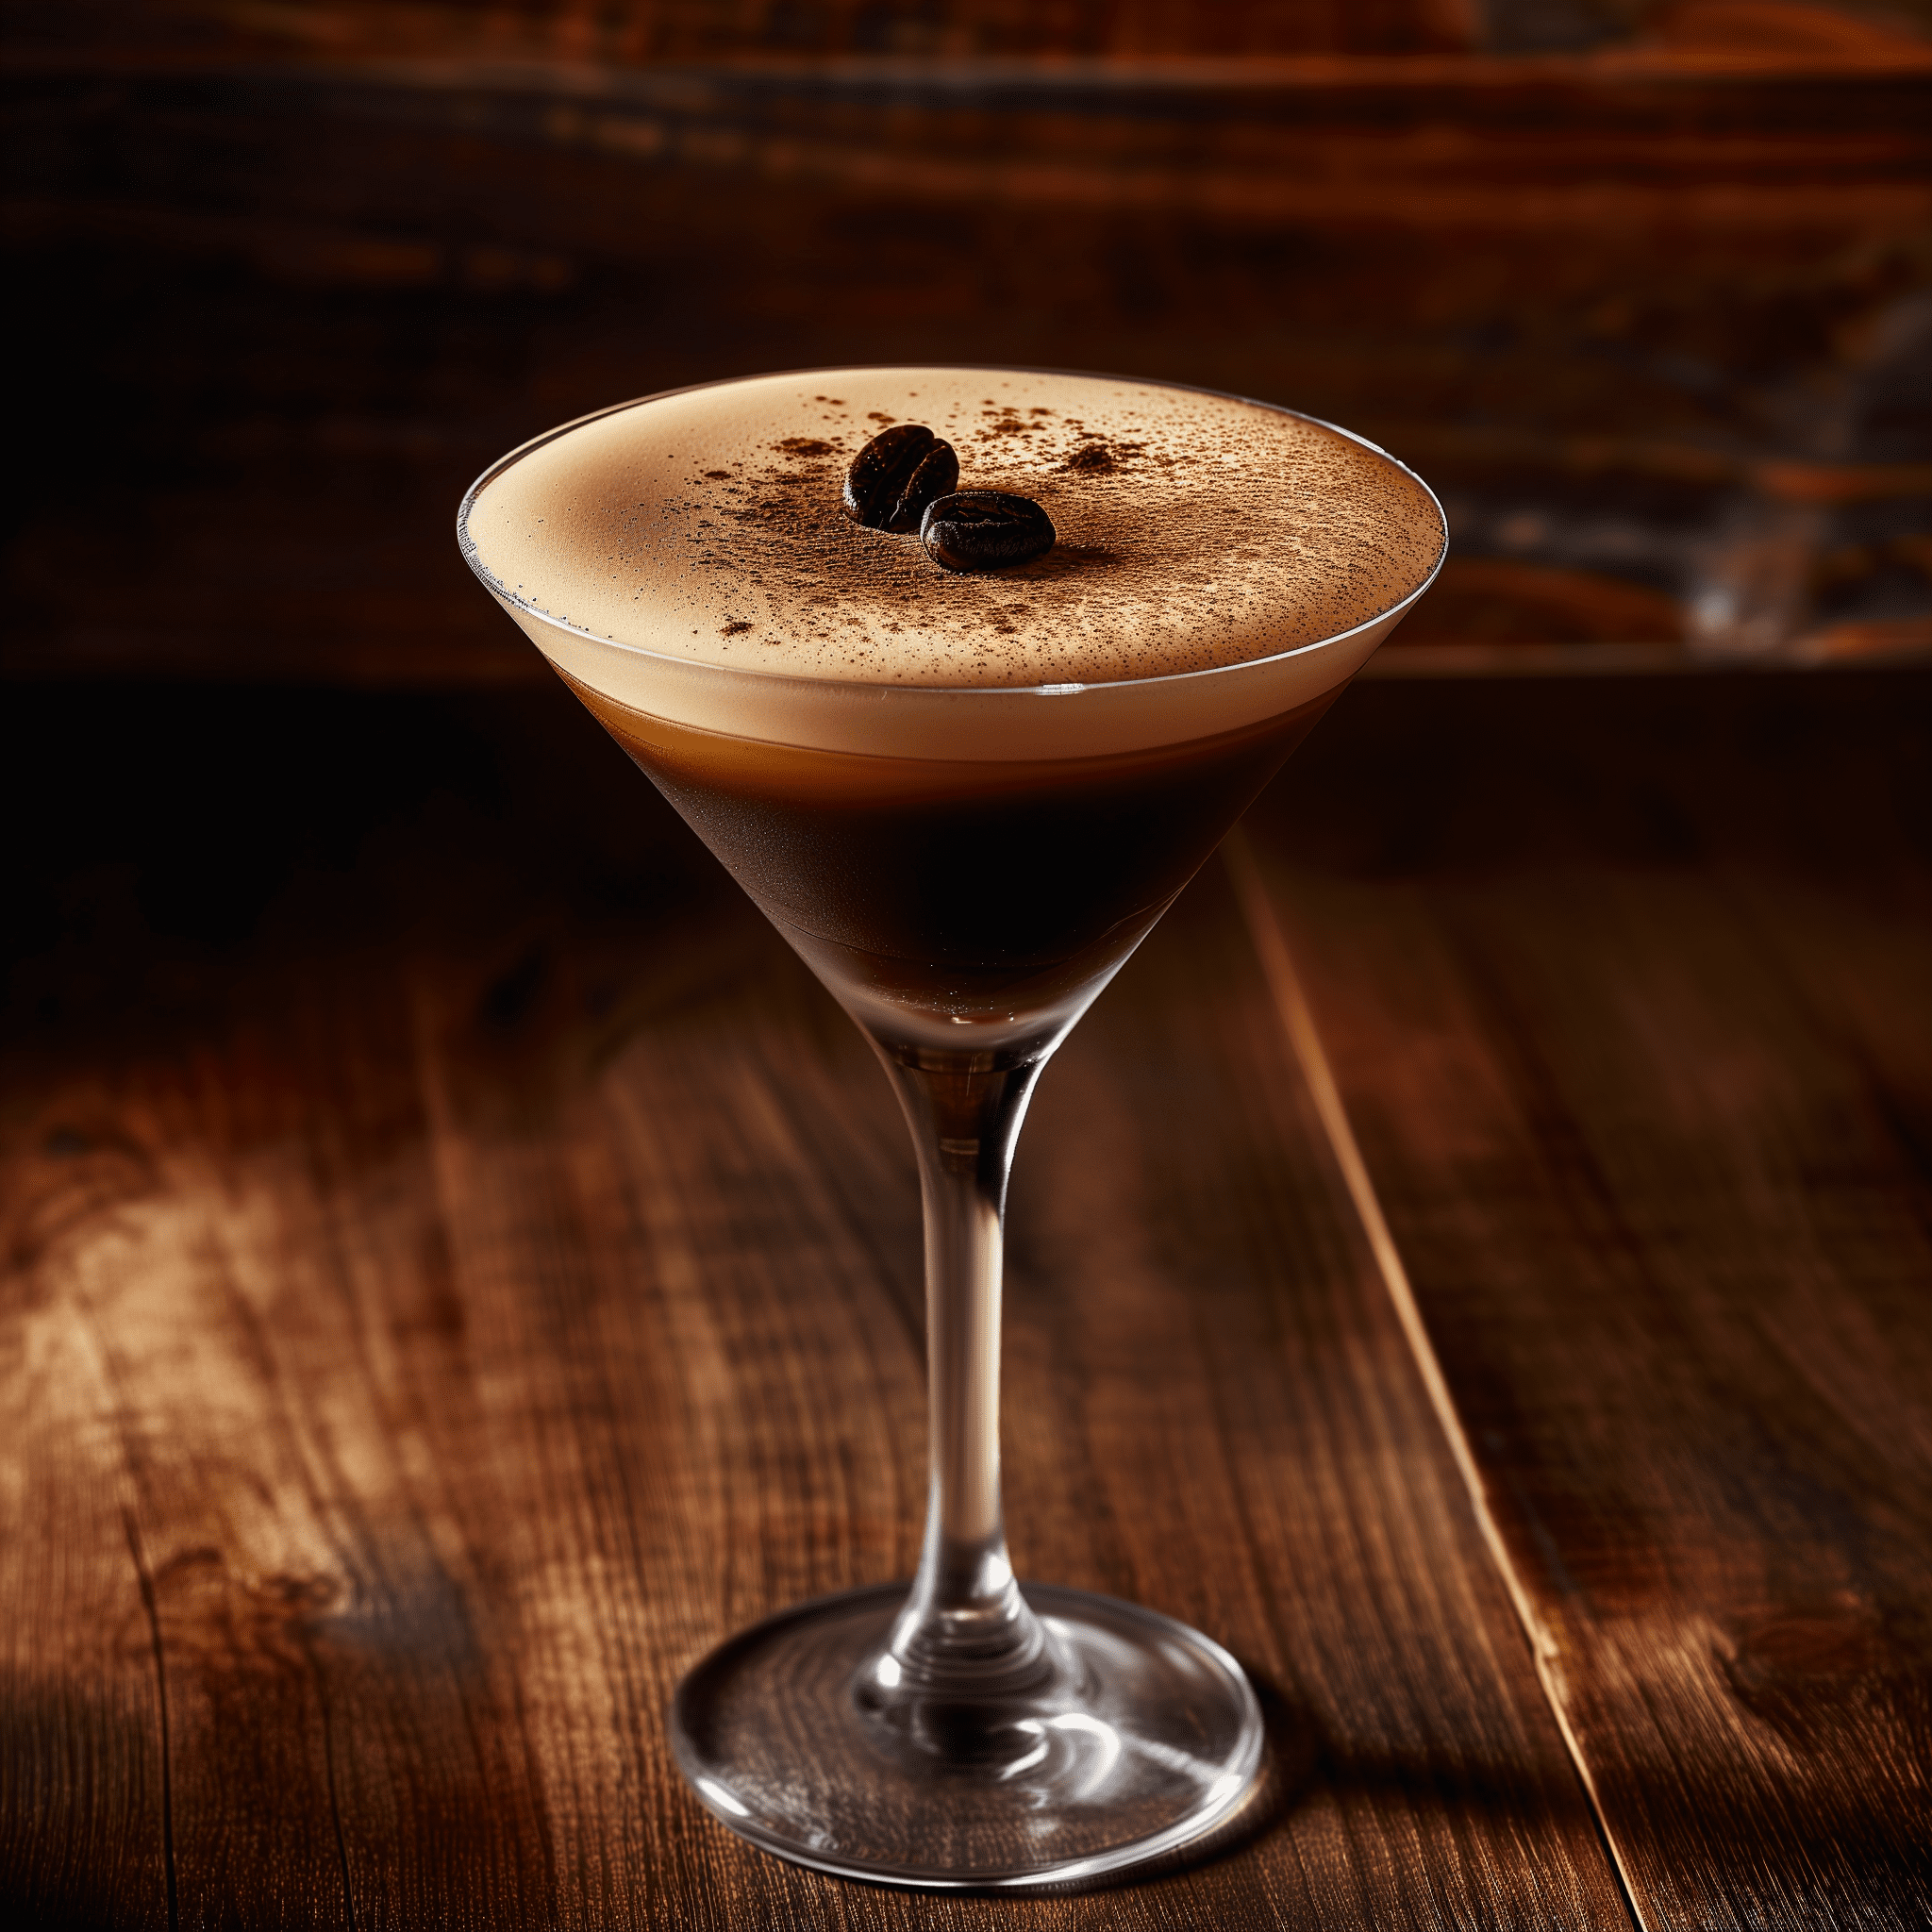 Non-Alcoholic Espresso Martini Recipe - This non-alcoholic Espresso Martini is rich and velvety, with a robust coffee flavor that's complemented by the aromatic spices of Seedlip Spice 94. It's slightly sweet with a deep, complex profile and a frothy top that adds a luxurious texture.